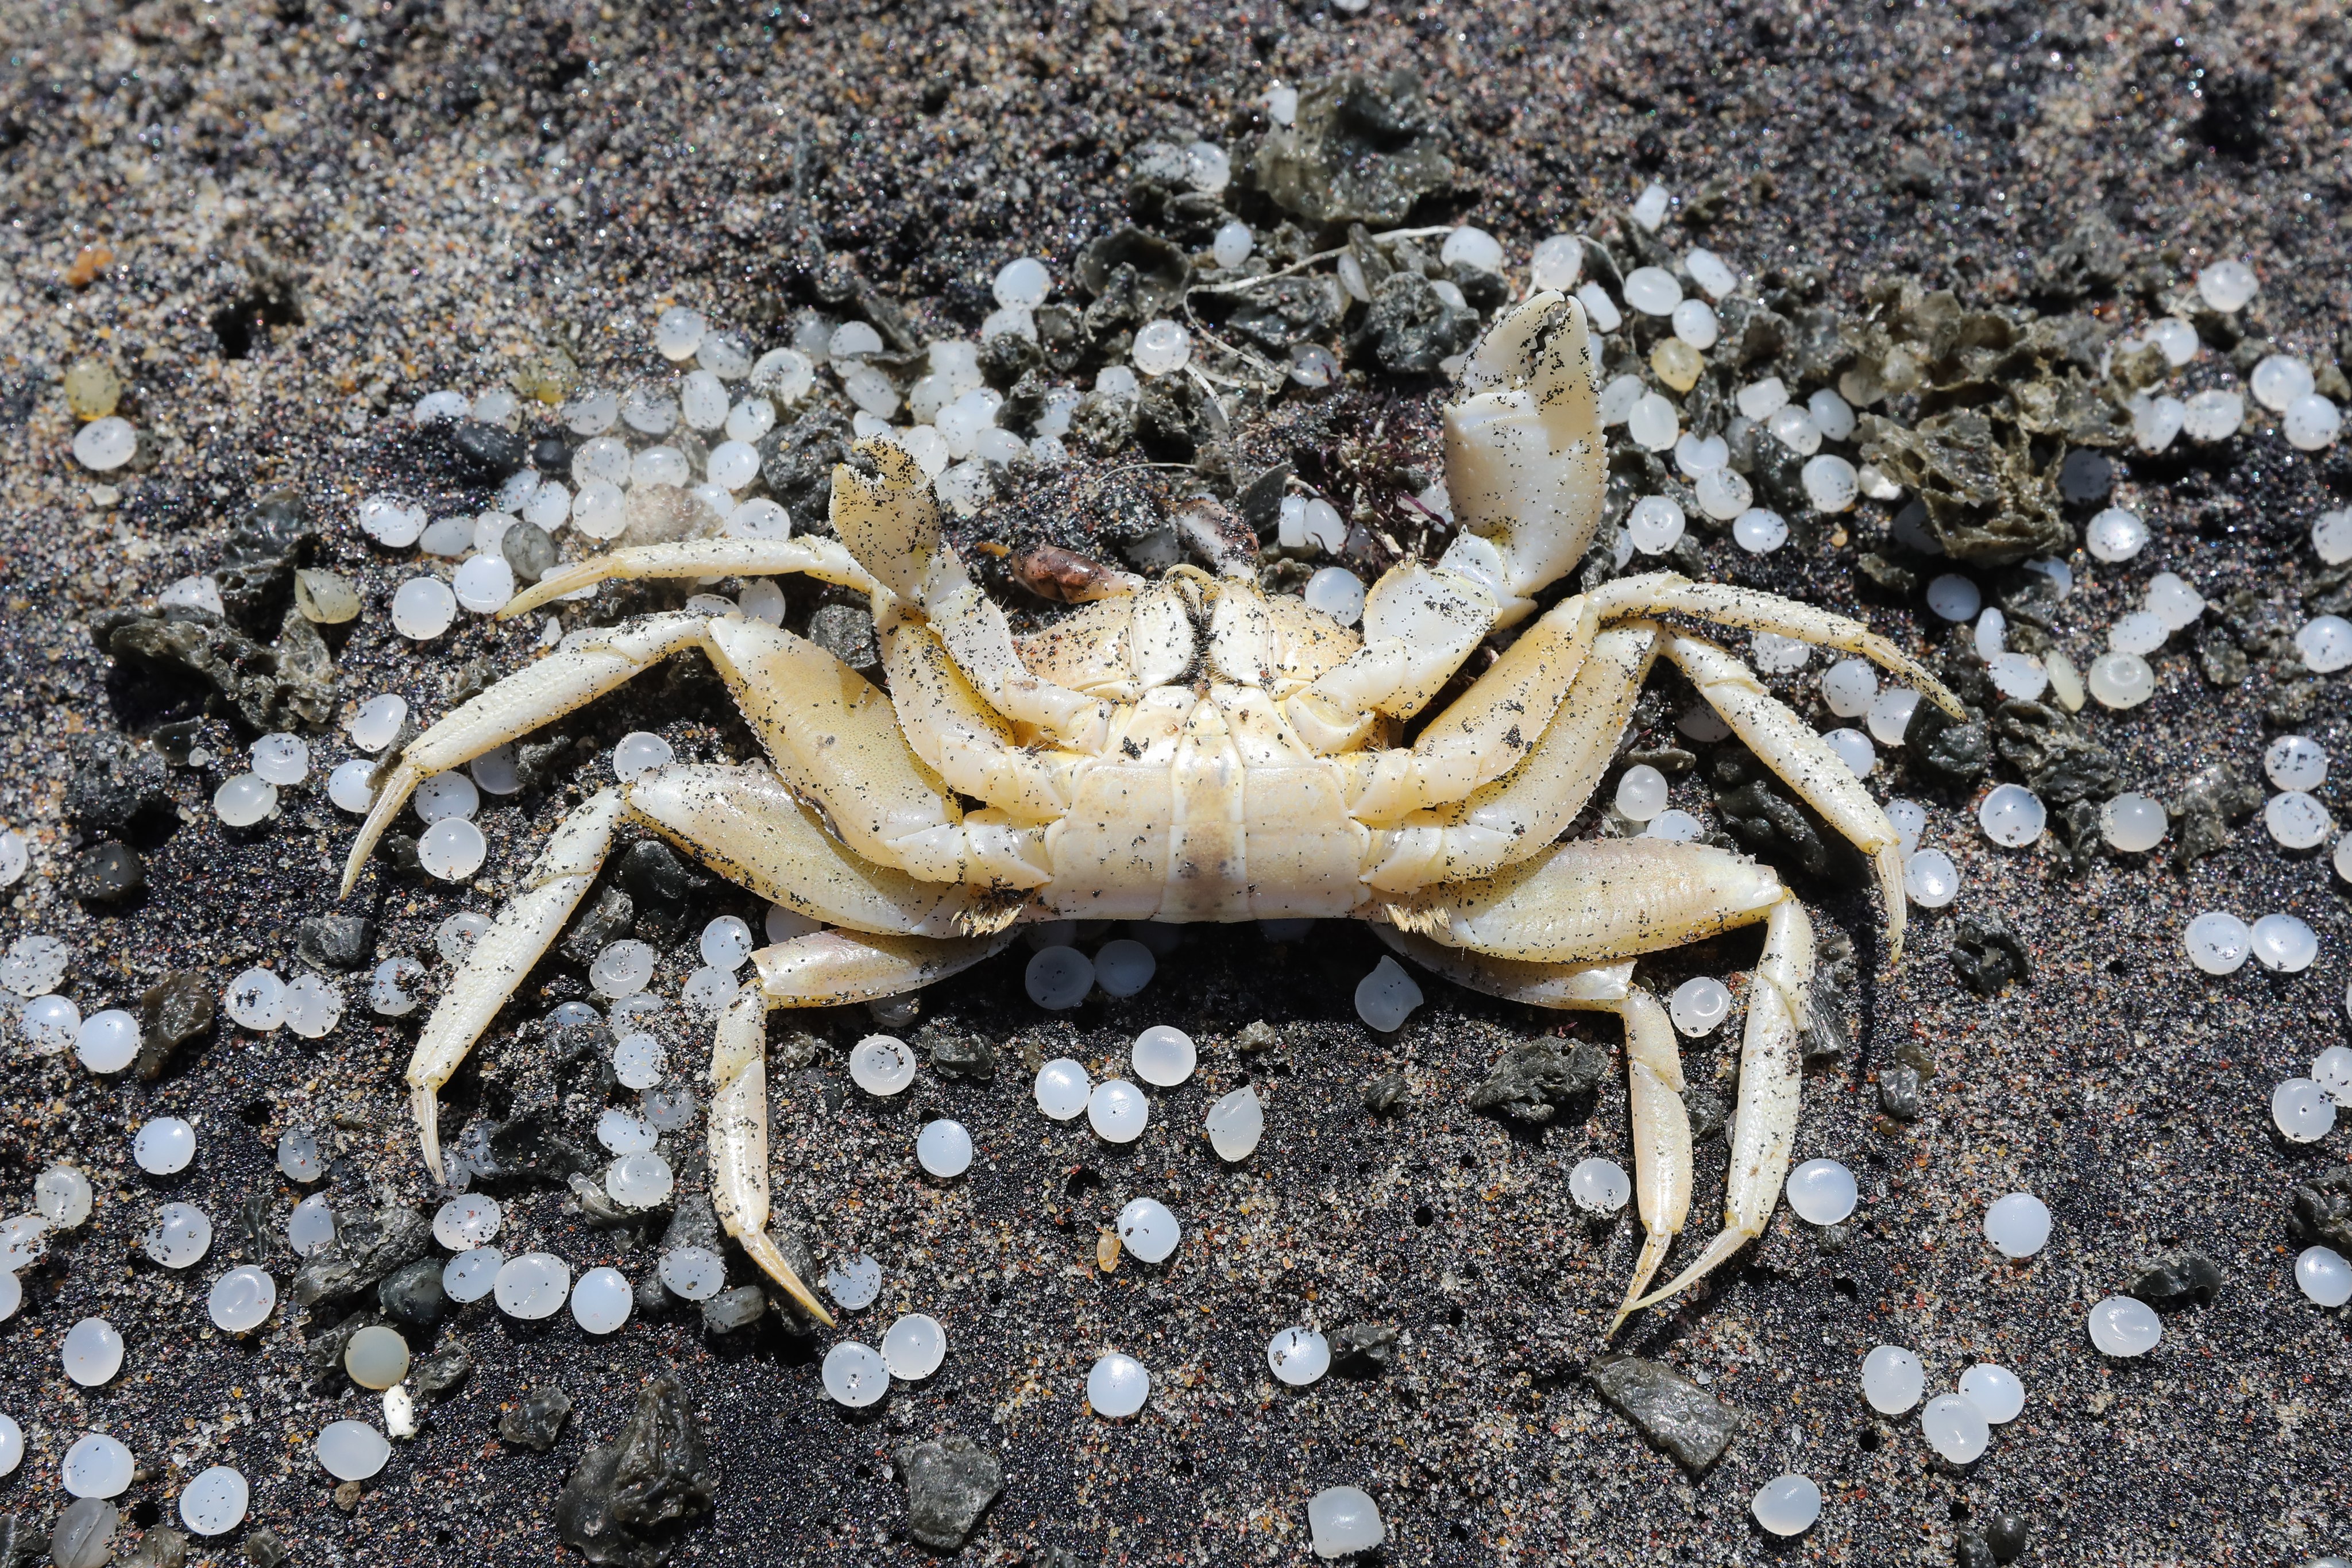 Finding a dead crab in your home can be quite alarming. Photo: EPA-EFE